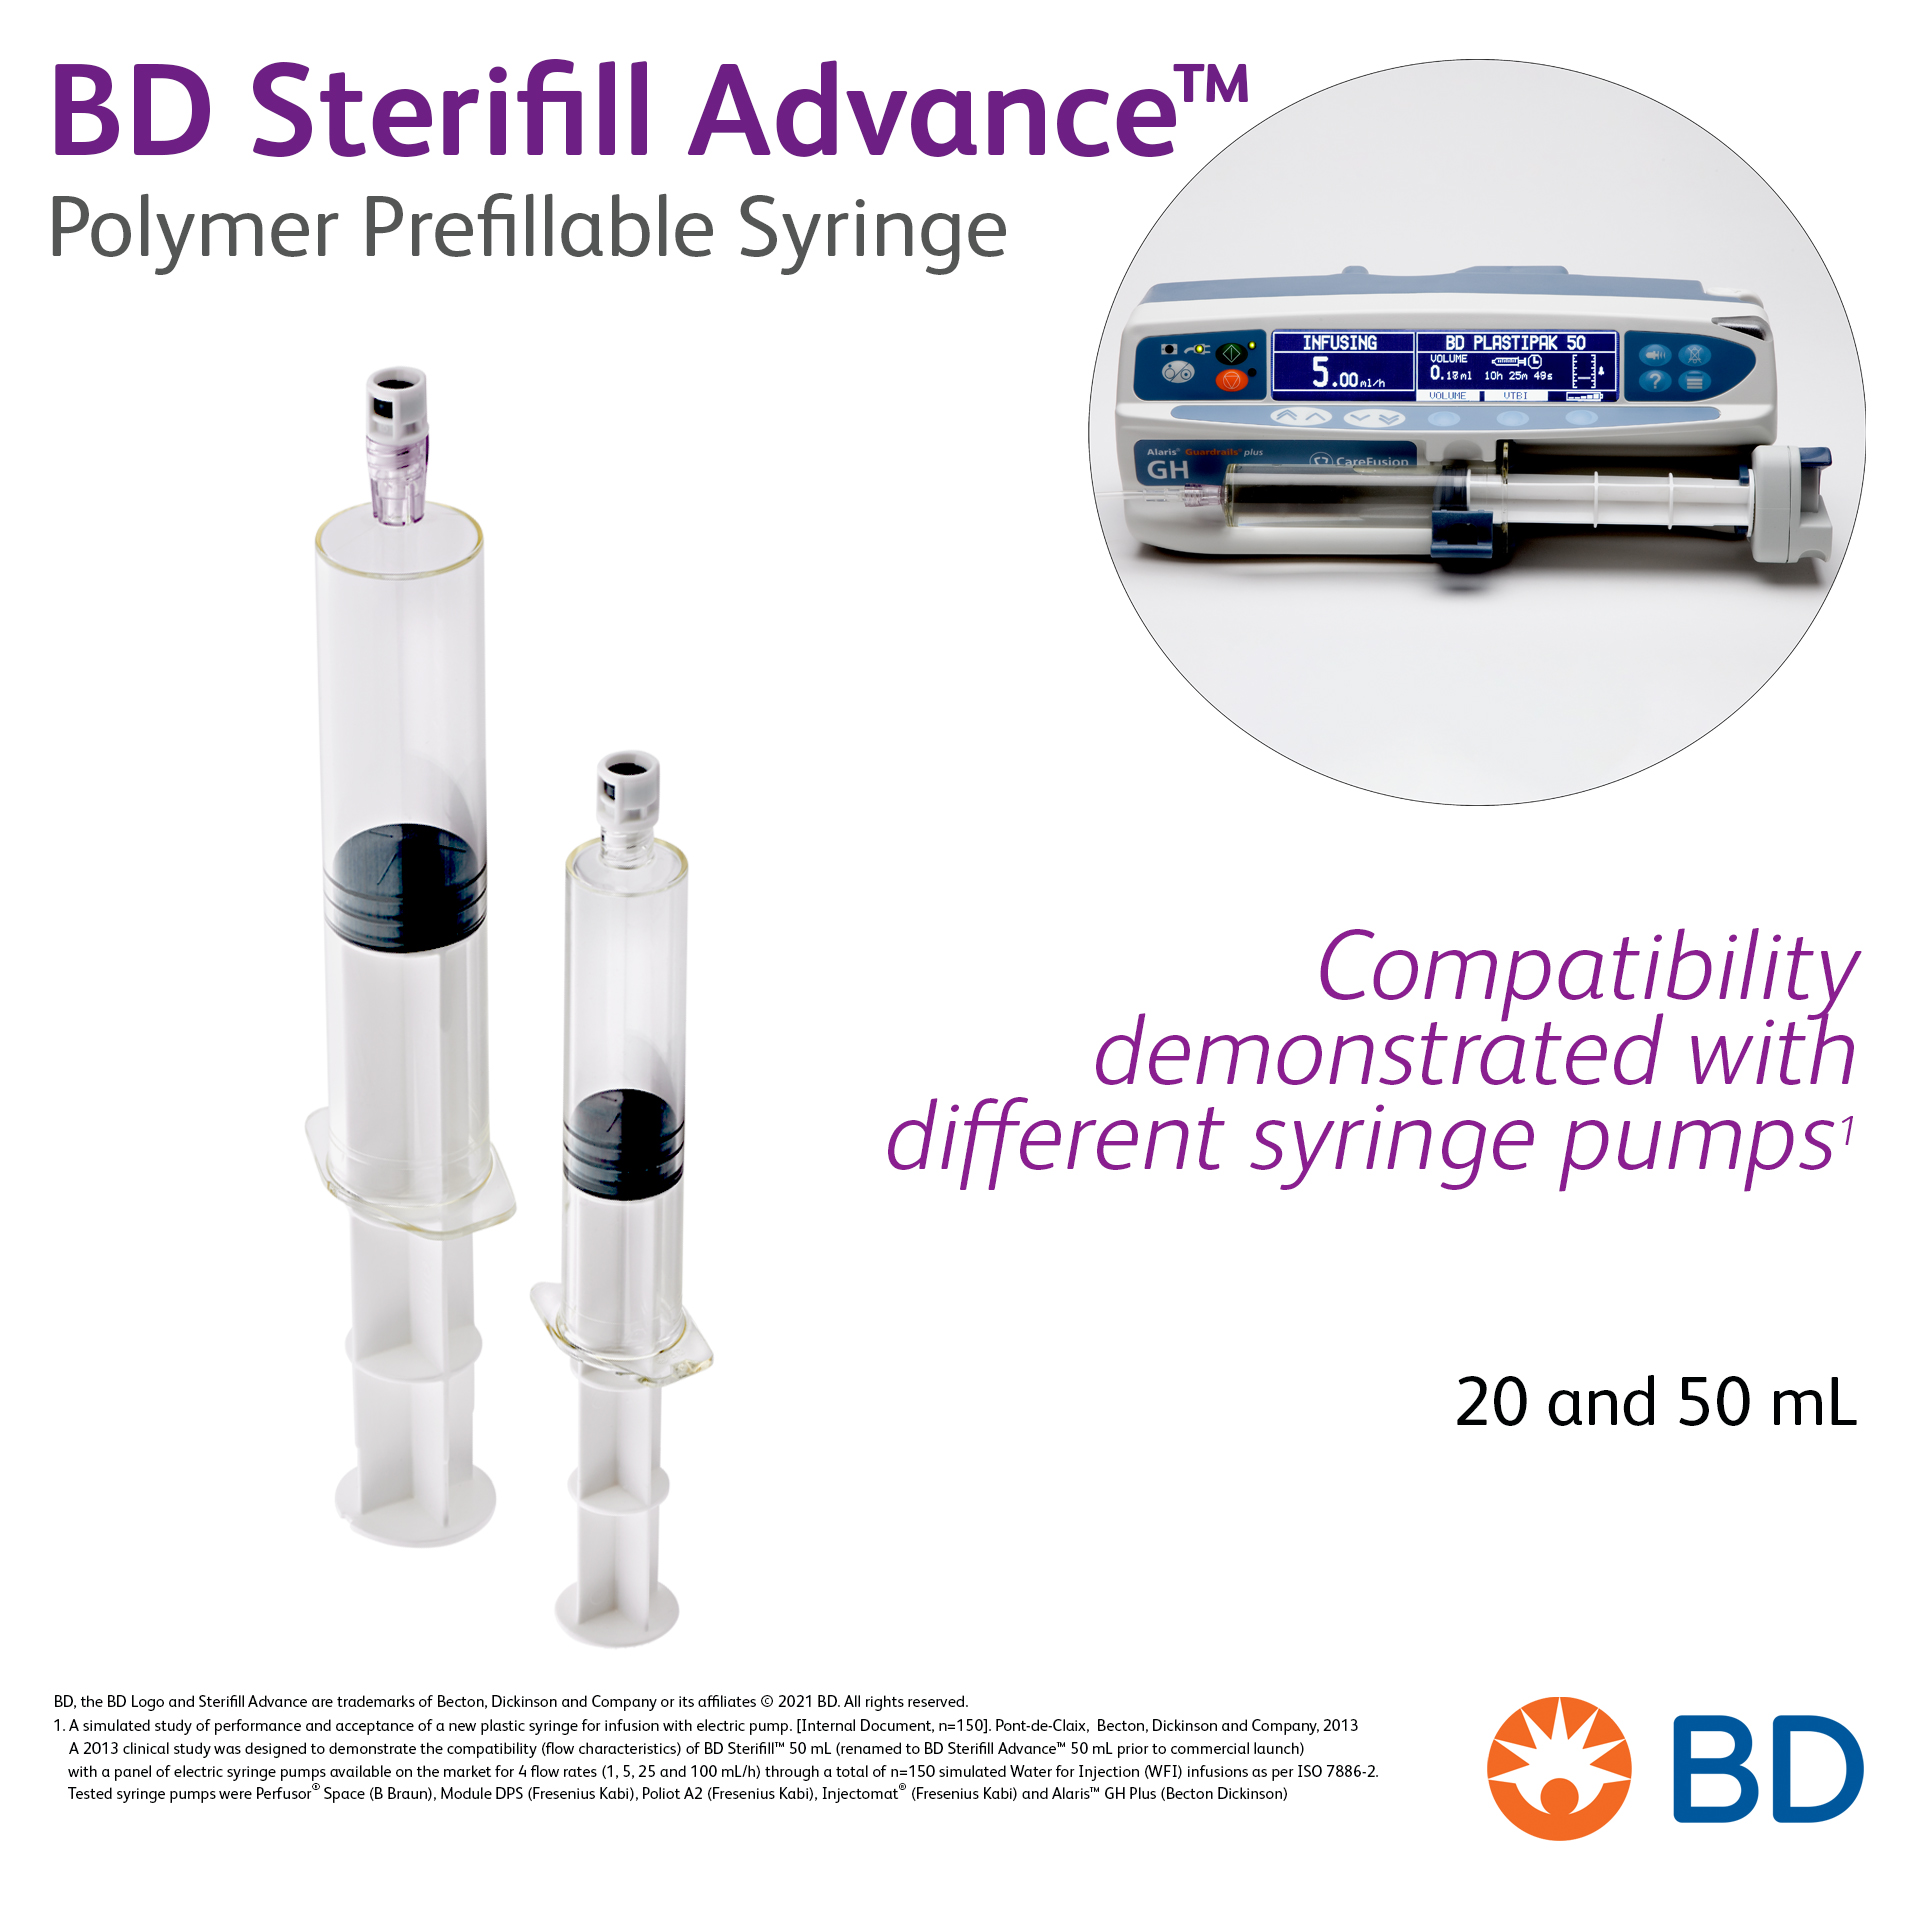 BD Sterifill Advance™ 20 & 50 mL Polymer Prefillable Syringes - Compatibility demonstrated with different syringe pumps